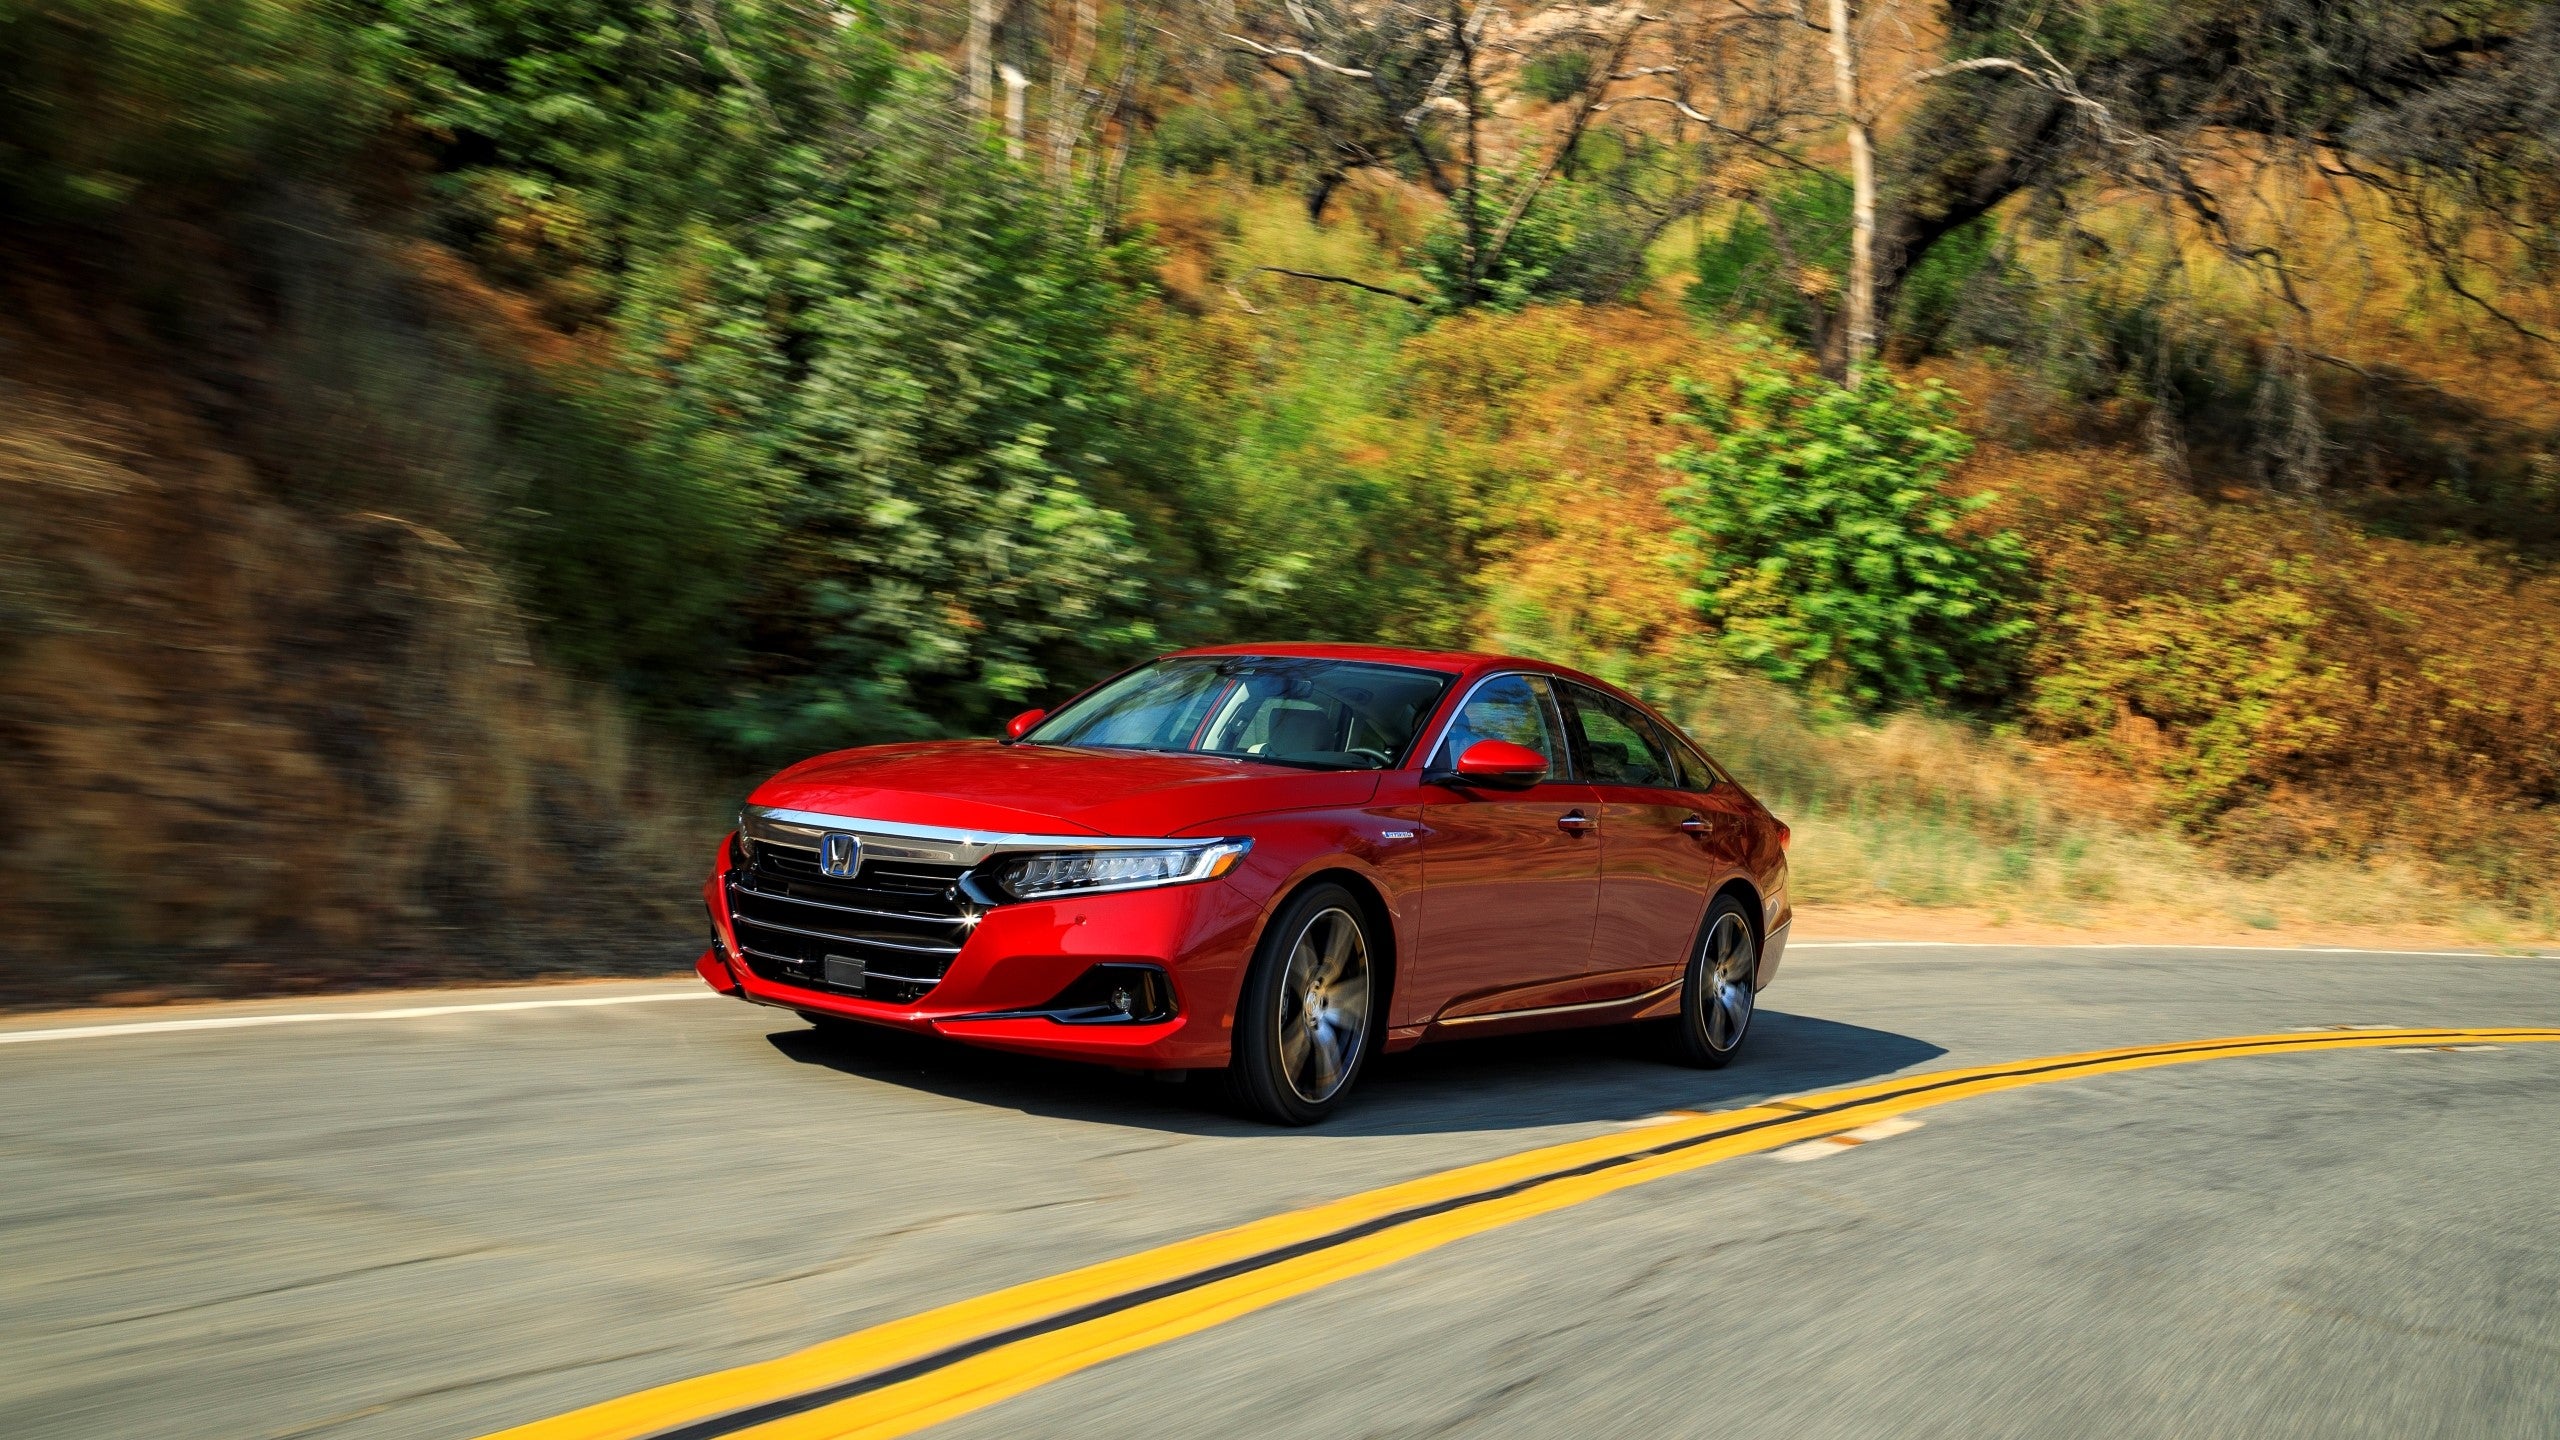 The 2021 Honda Accord Doesn't Fix What Isn't Broken | The Drive